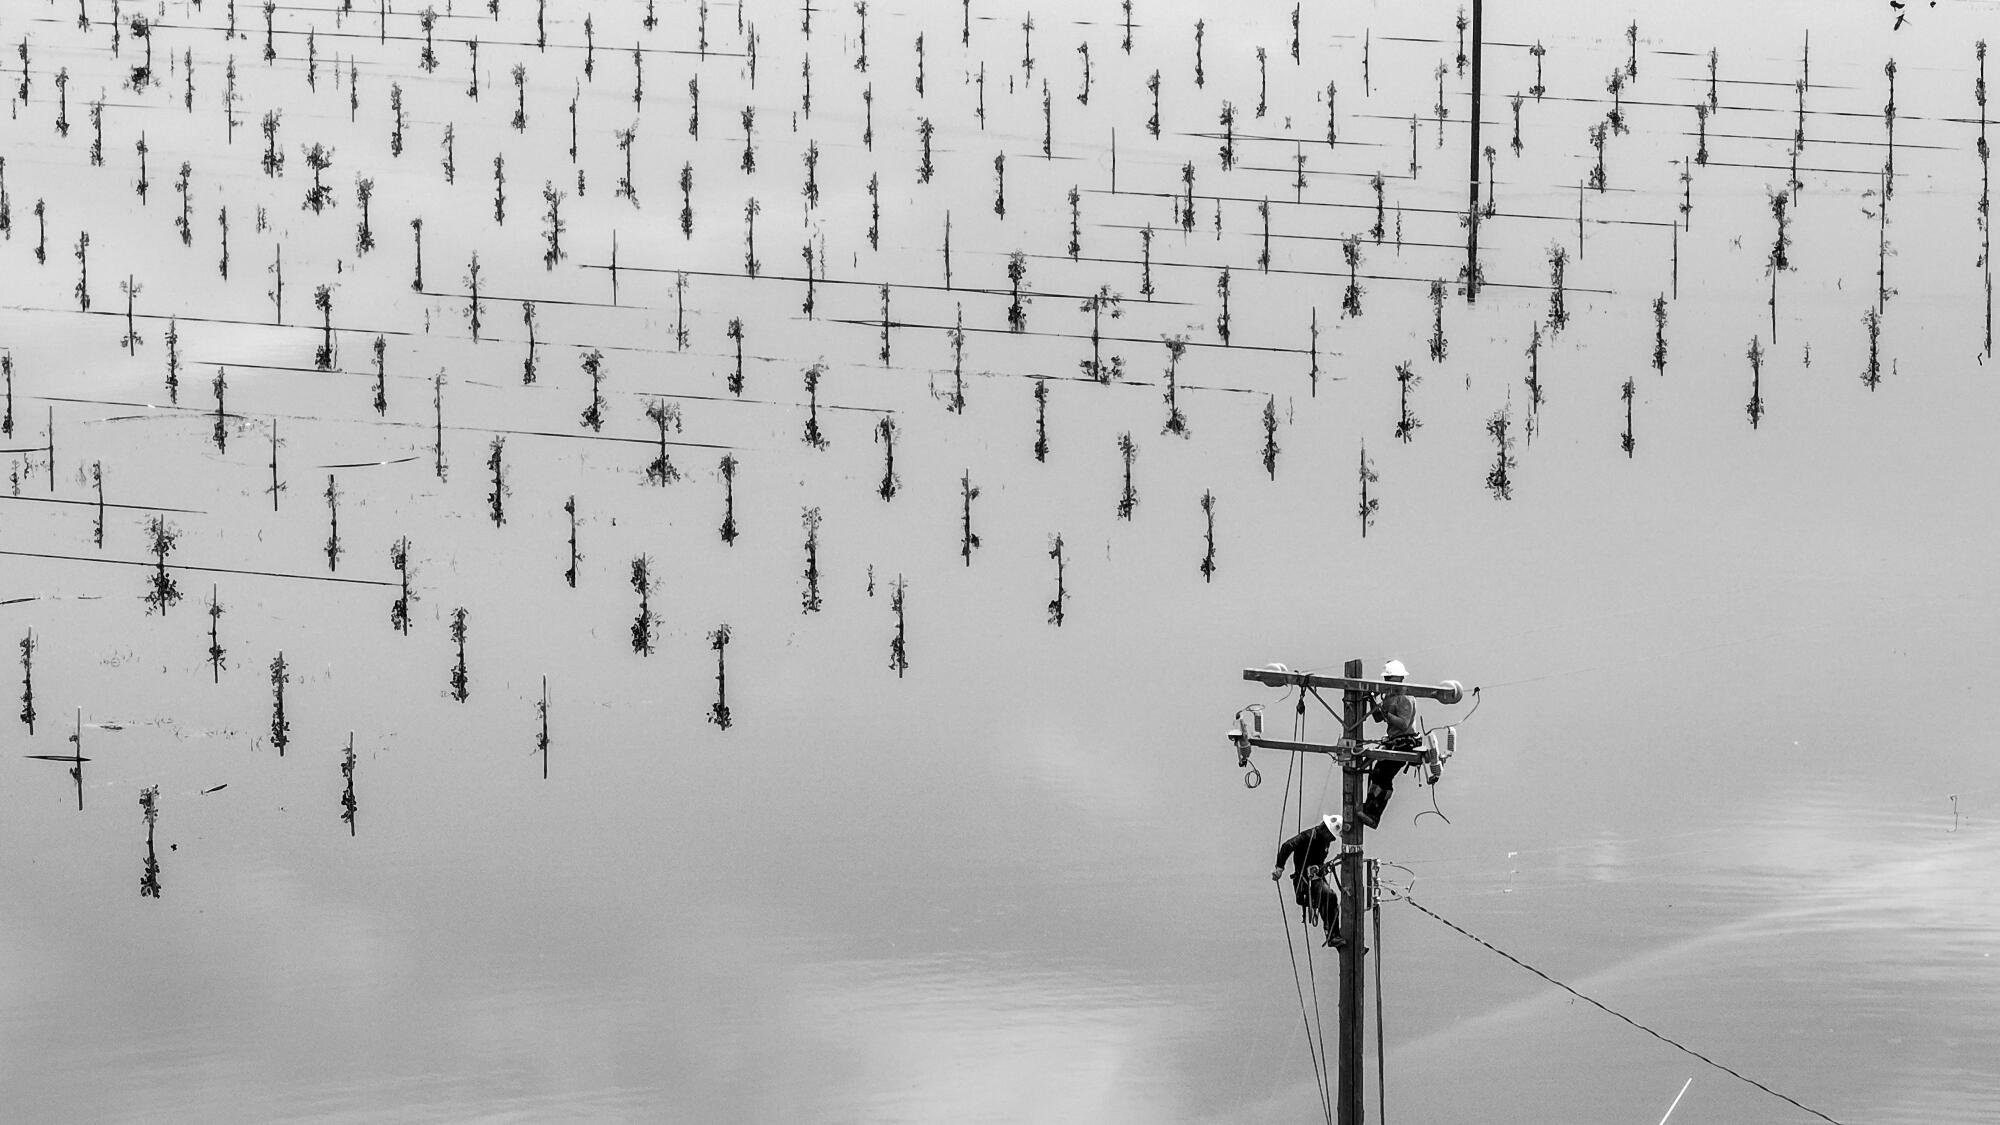 Workers atop a utility pole tower above a flooded field lined with orderly rows of tree tips.